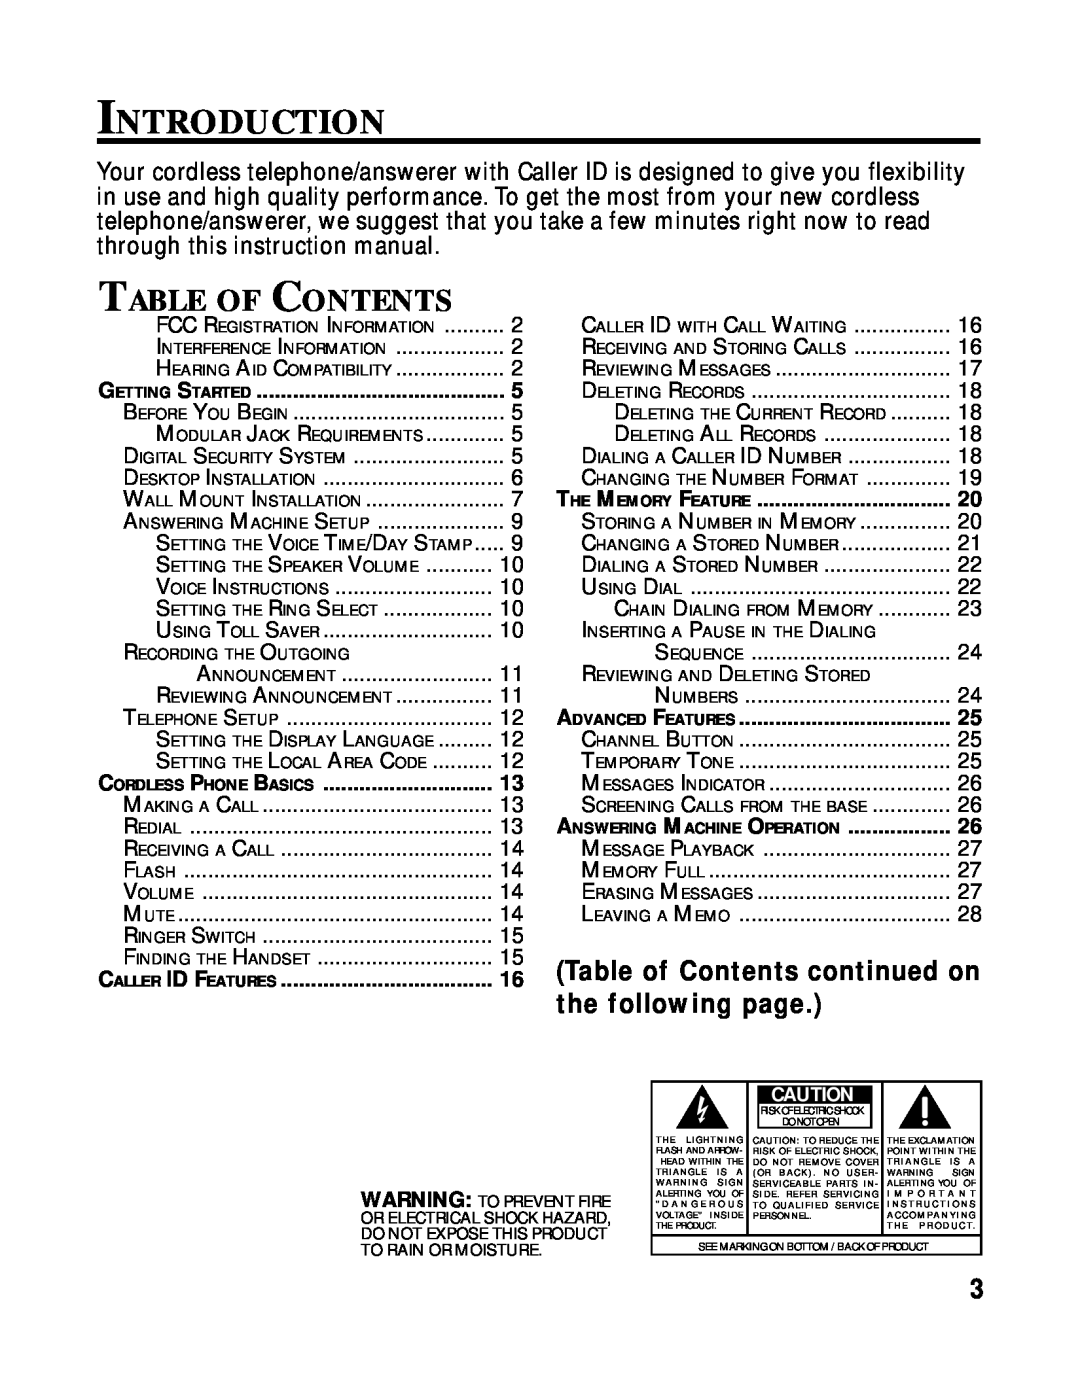 RCA 900 MHz manual Introduction, Table Of Contents, Table of Contents continued on, the following page 